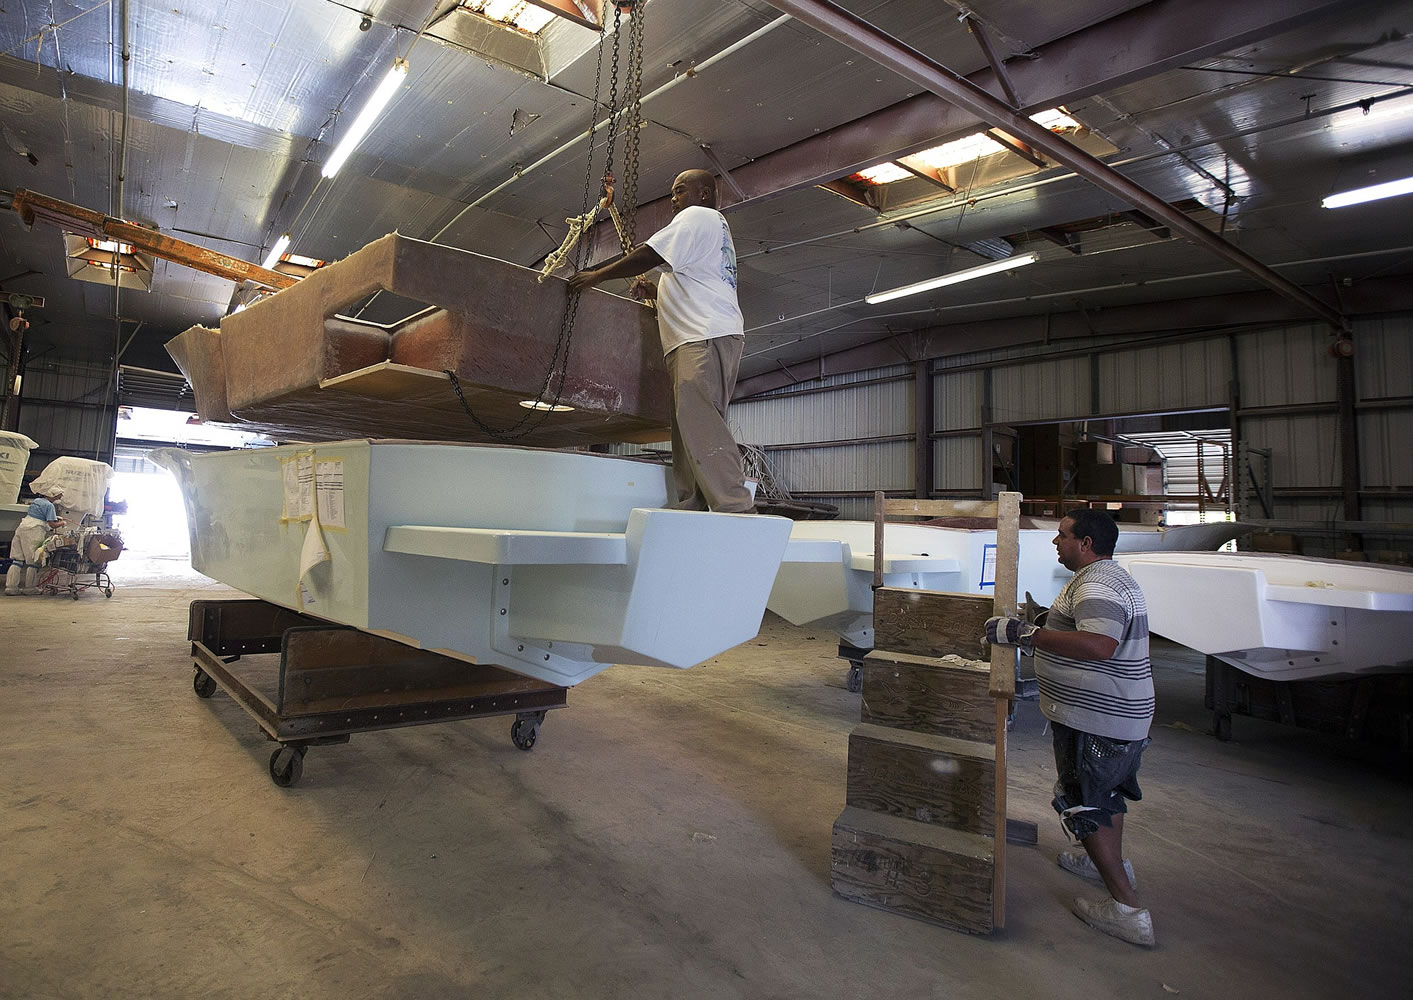 Associated Press files
Workers at the Dusky Marine factory in Dania Beach, Fla., begin to assemble one of the custom boats they built at the family owned business. Each year the company makes 50-100 fishing boats.